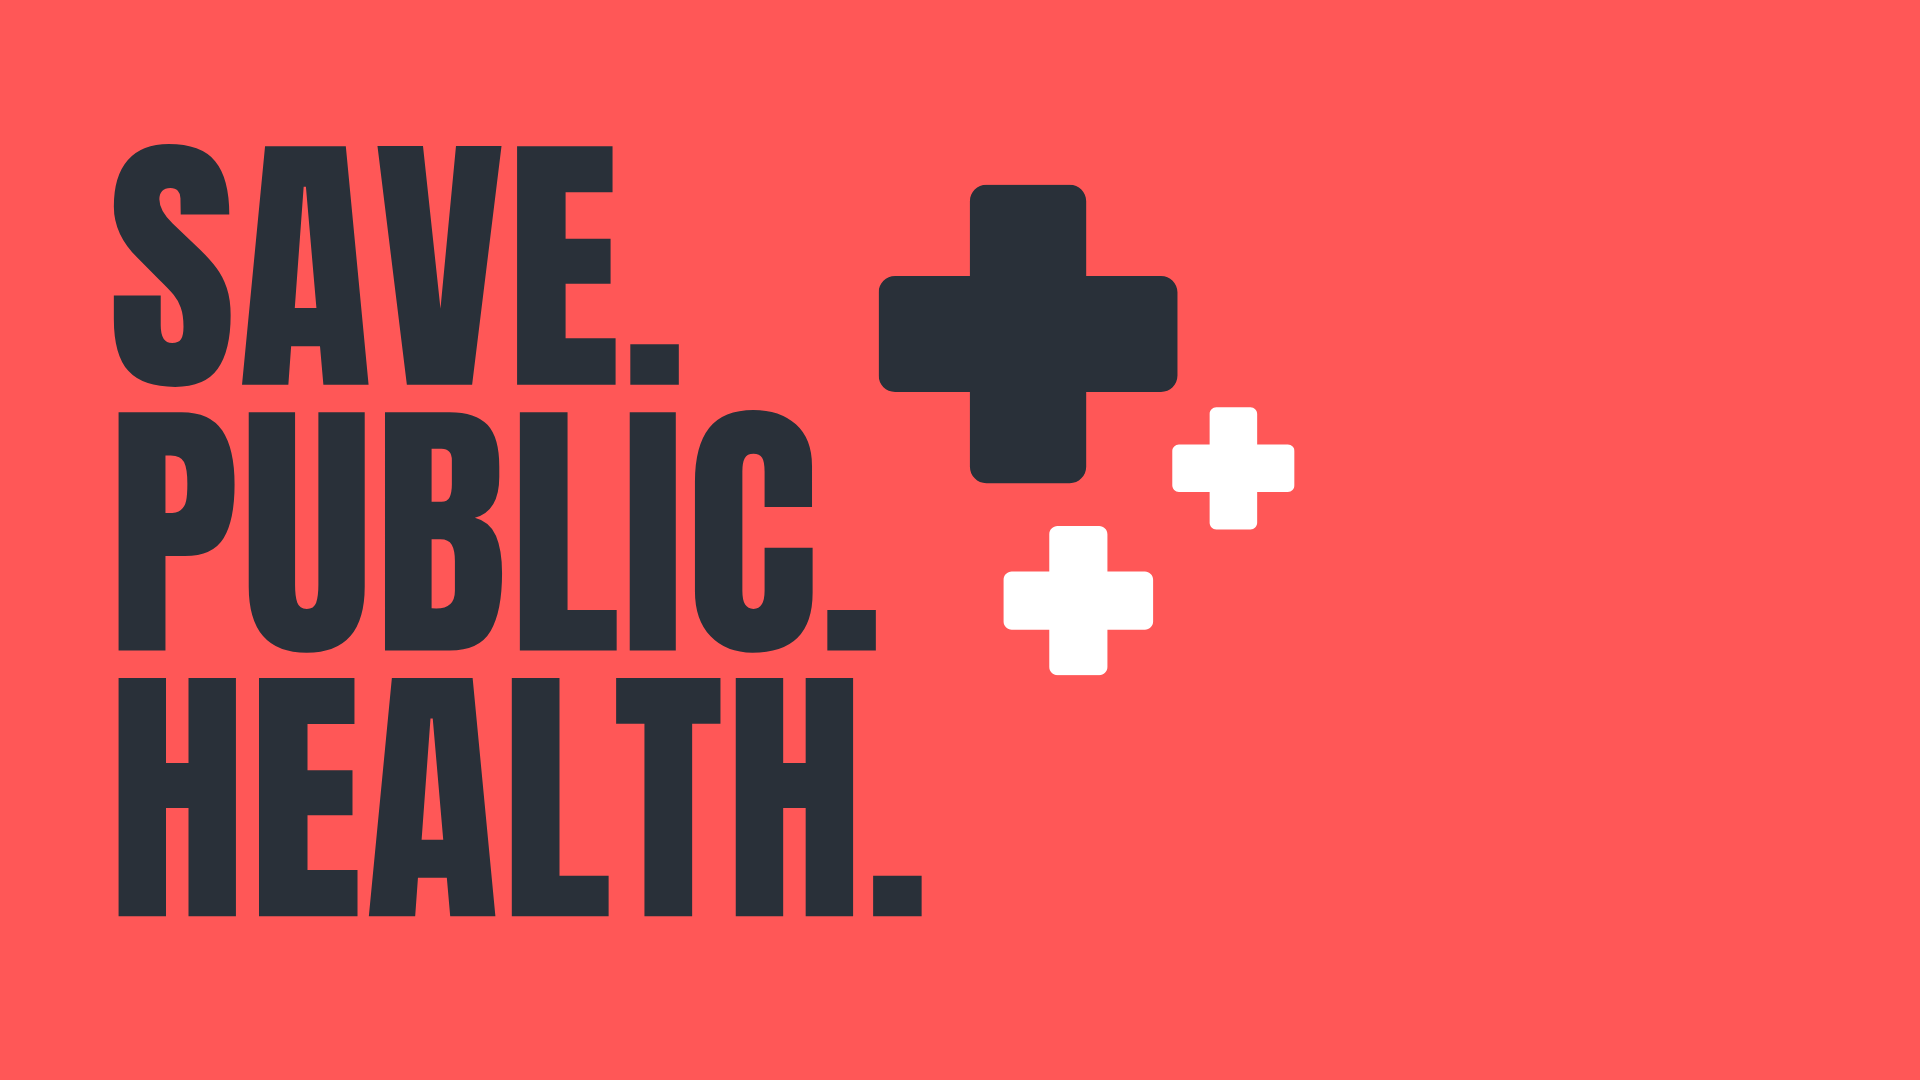 On a dark coral background, the image title text reads, "SAVE. PUBLIC. HEALTH." To the right are health cross symbols of varying sizes. To the right are the logos of the unions/organizations who are co-leading these efforts (PROTEC17, WSNA, MLK Labor Council, OPEIU Local 8, Puget Sound Sage, and Got Green Seattle).